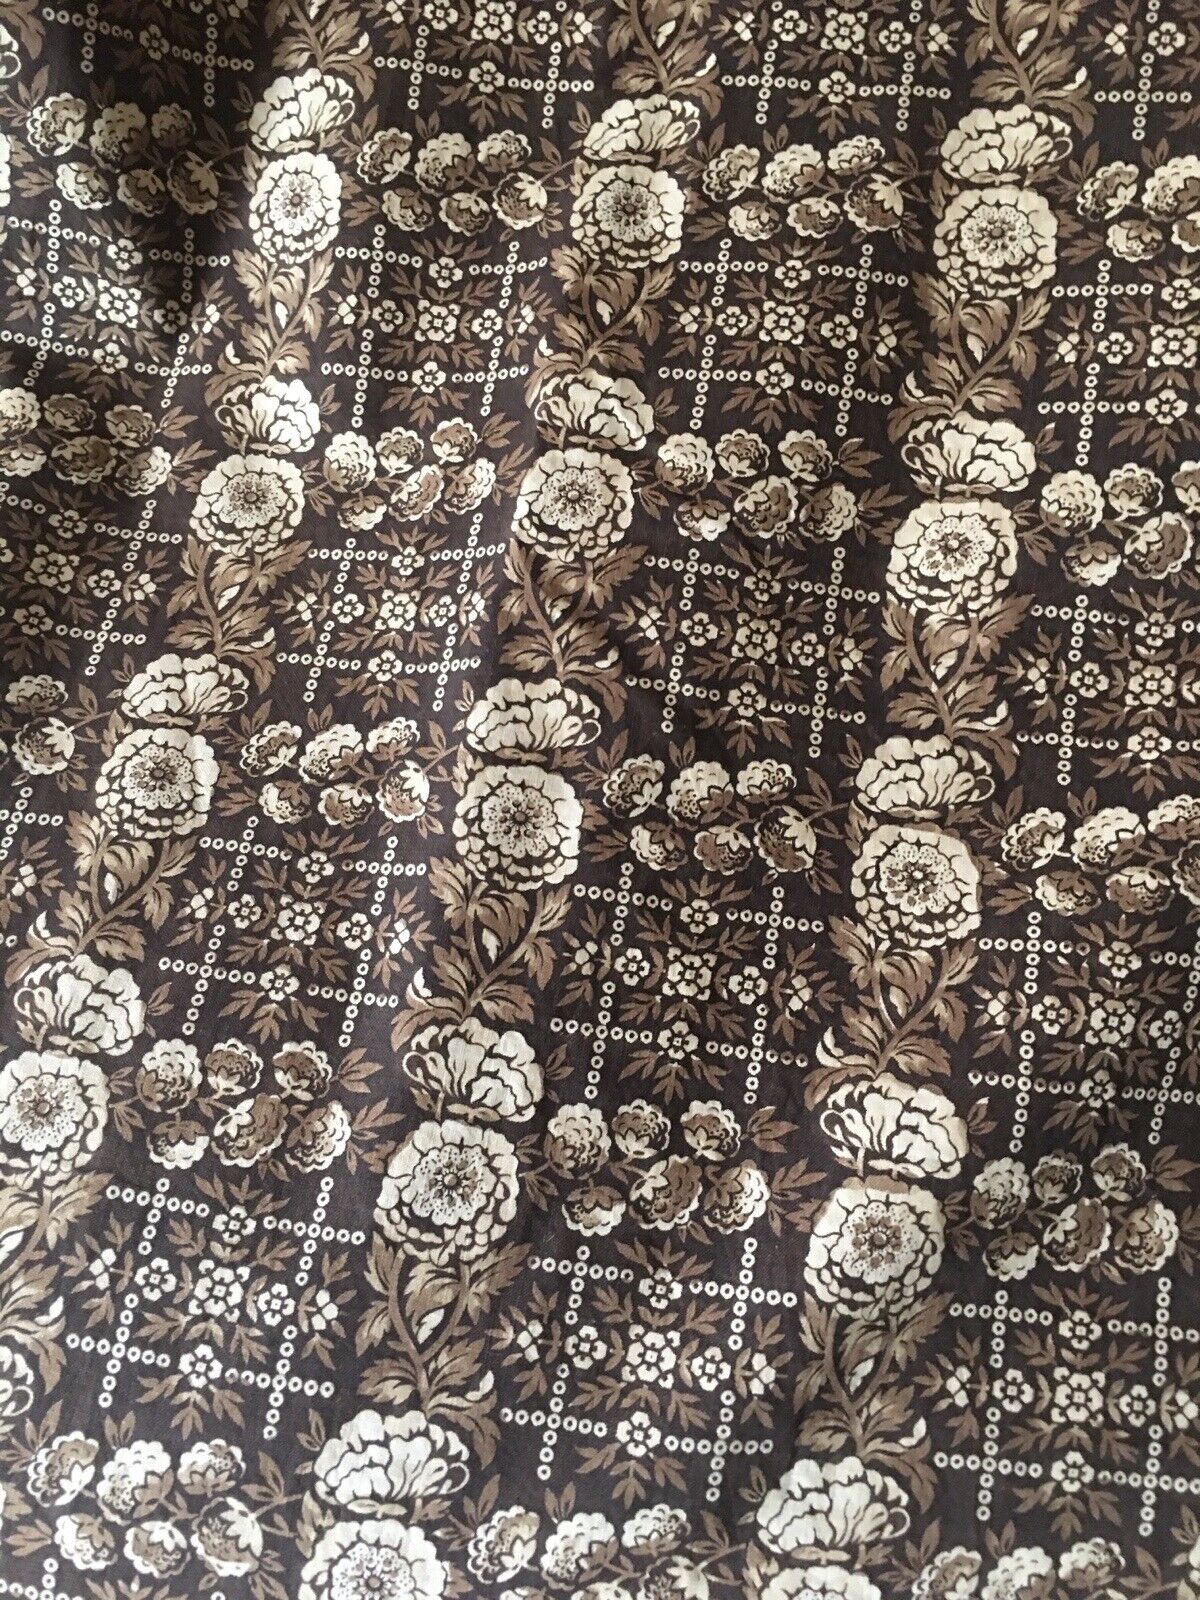 Rare Antique Early 19th C  English Zenia Floral Chintz Cotton Fabric ~ Brown